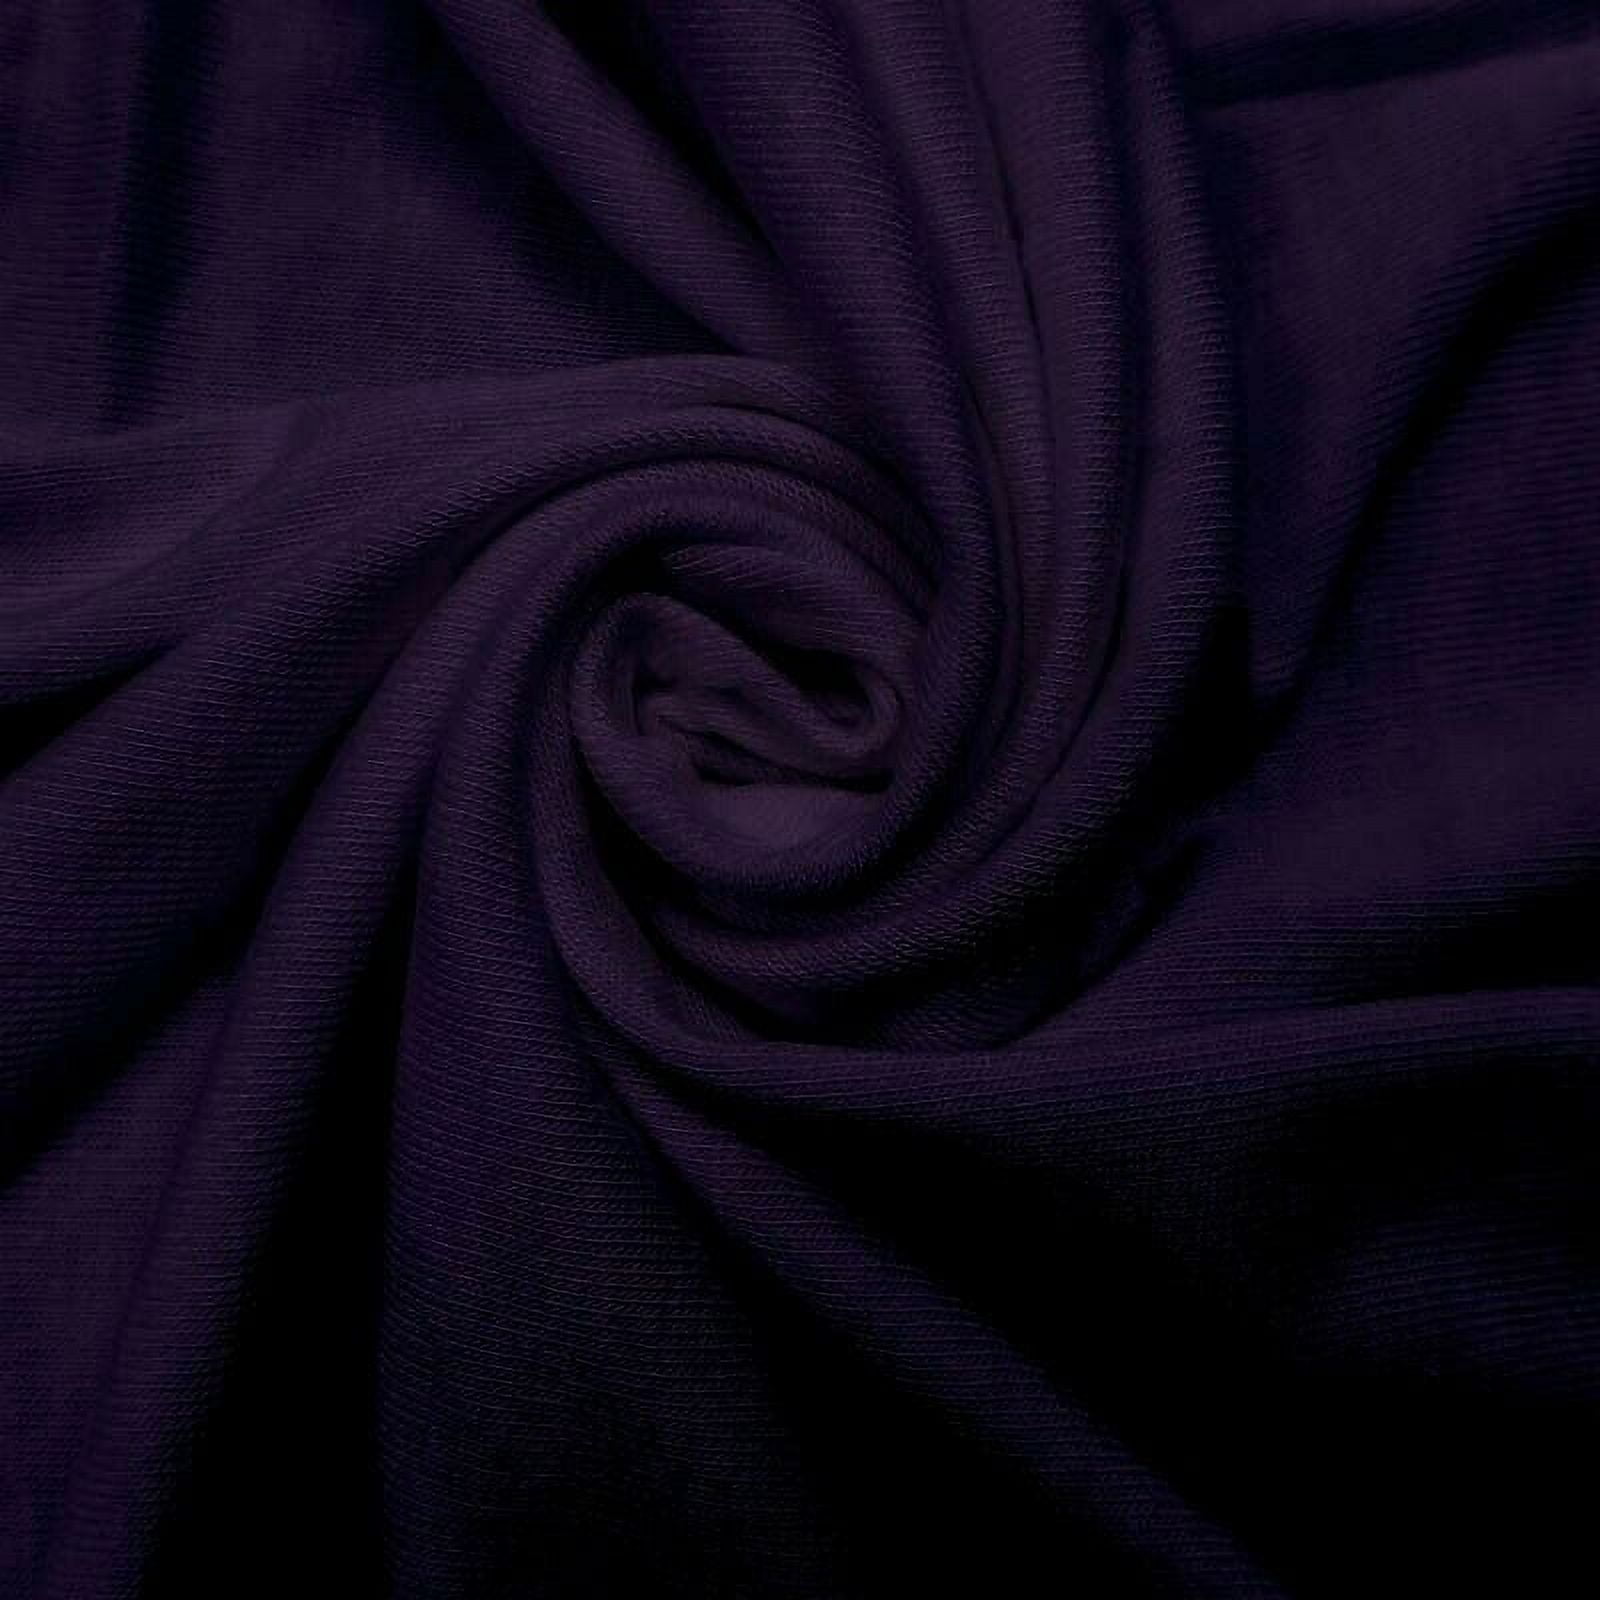 Light Lavender Medium Weight Rayon Spandex Jersey Knit Fabric by the Yard 1  Yard Style 409 